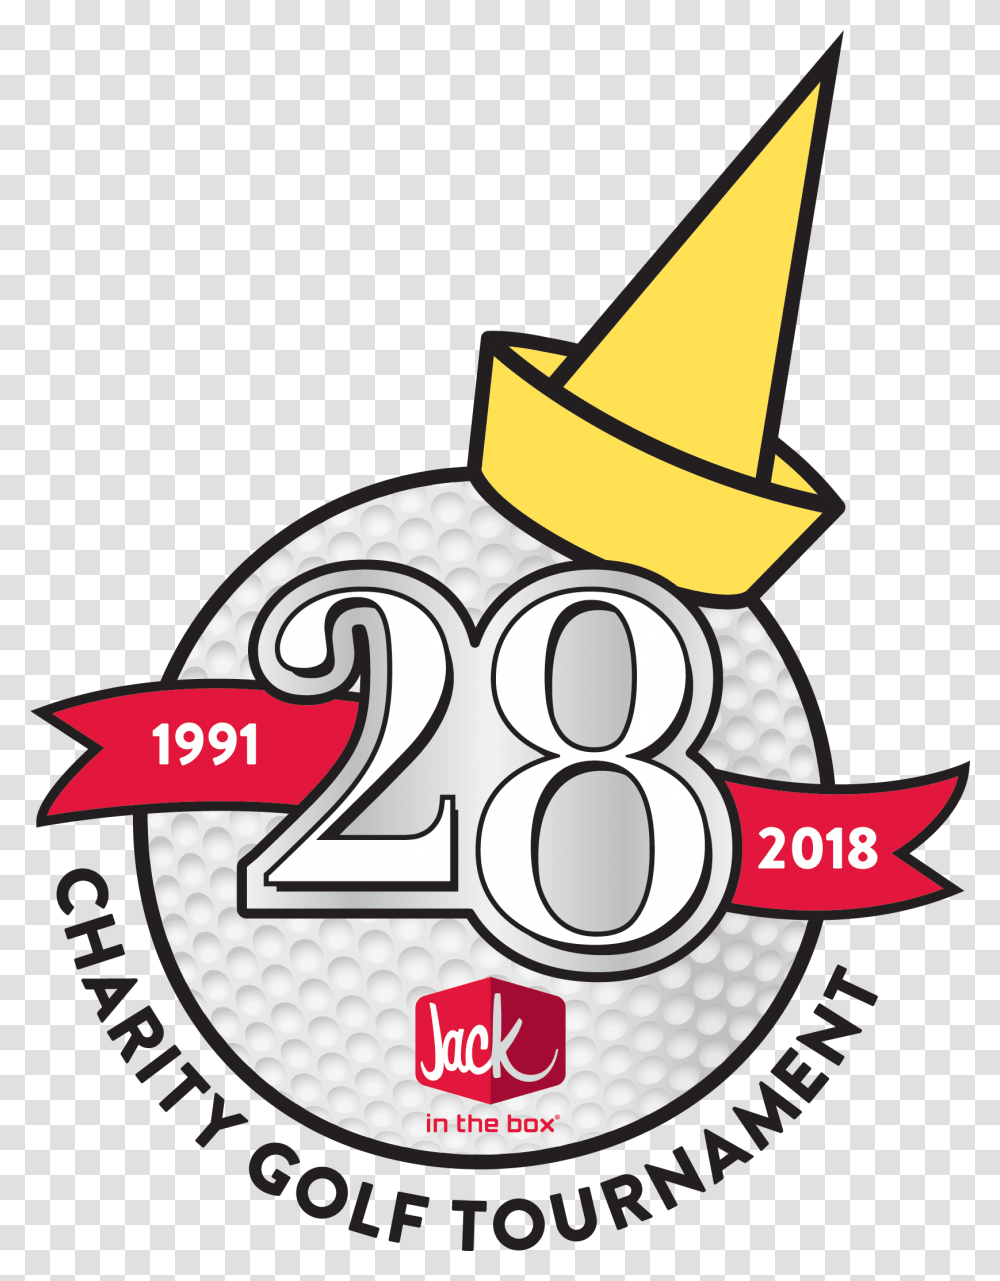 Download Jack In The Box Logo Jack In The Box Jack In The Box, Clothing, Apparel, Party Hat, Text Transparent Png